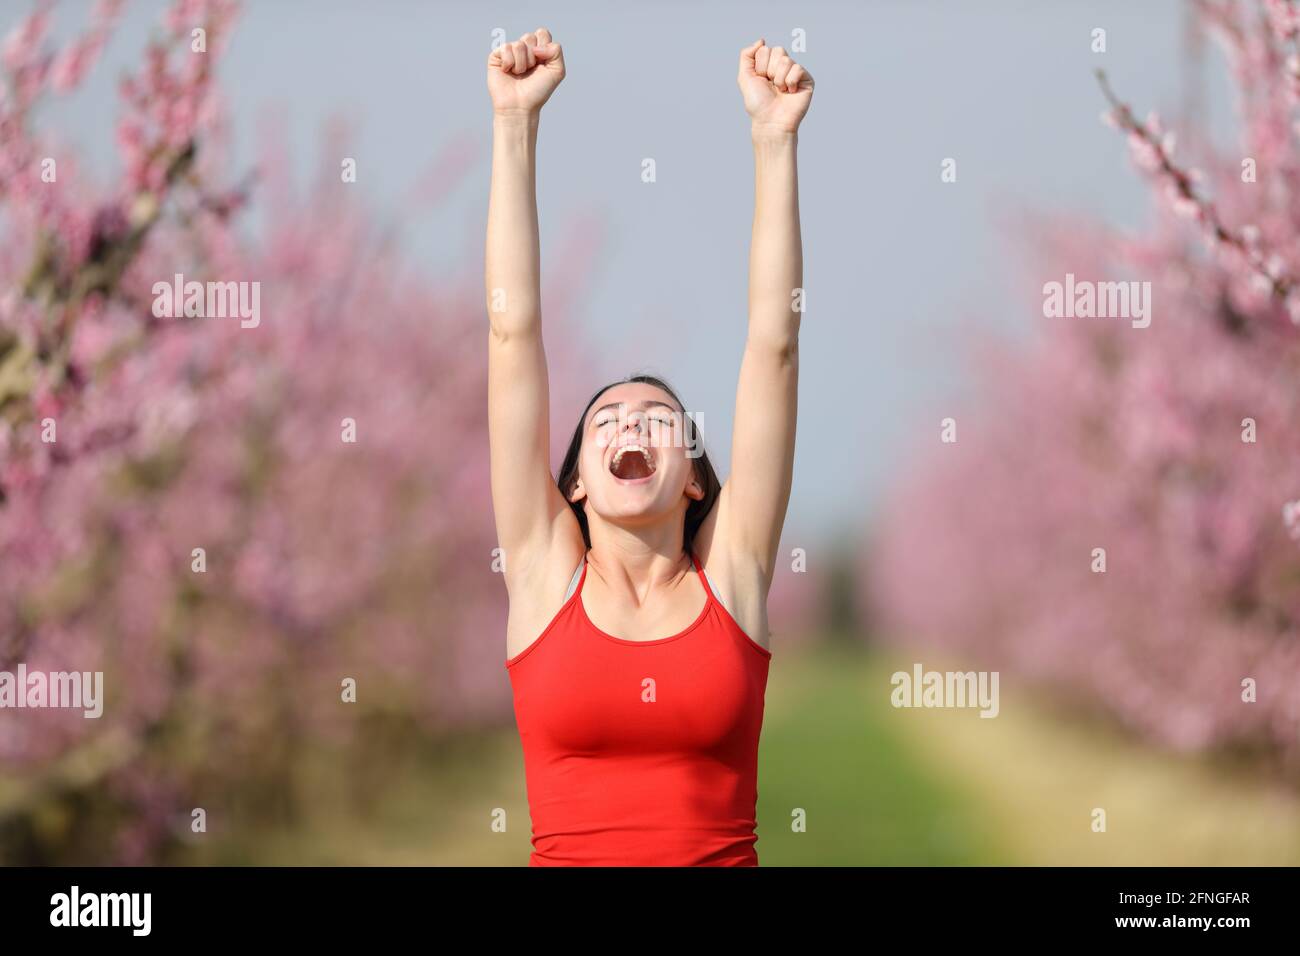 Front view of an excited woman in red raisng arms showing waxed armpit in nature Stock Photo